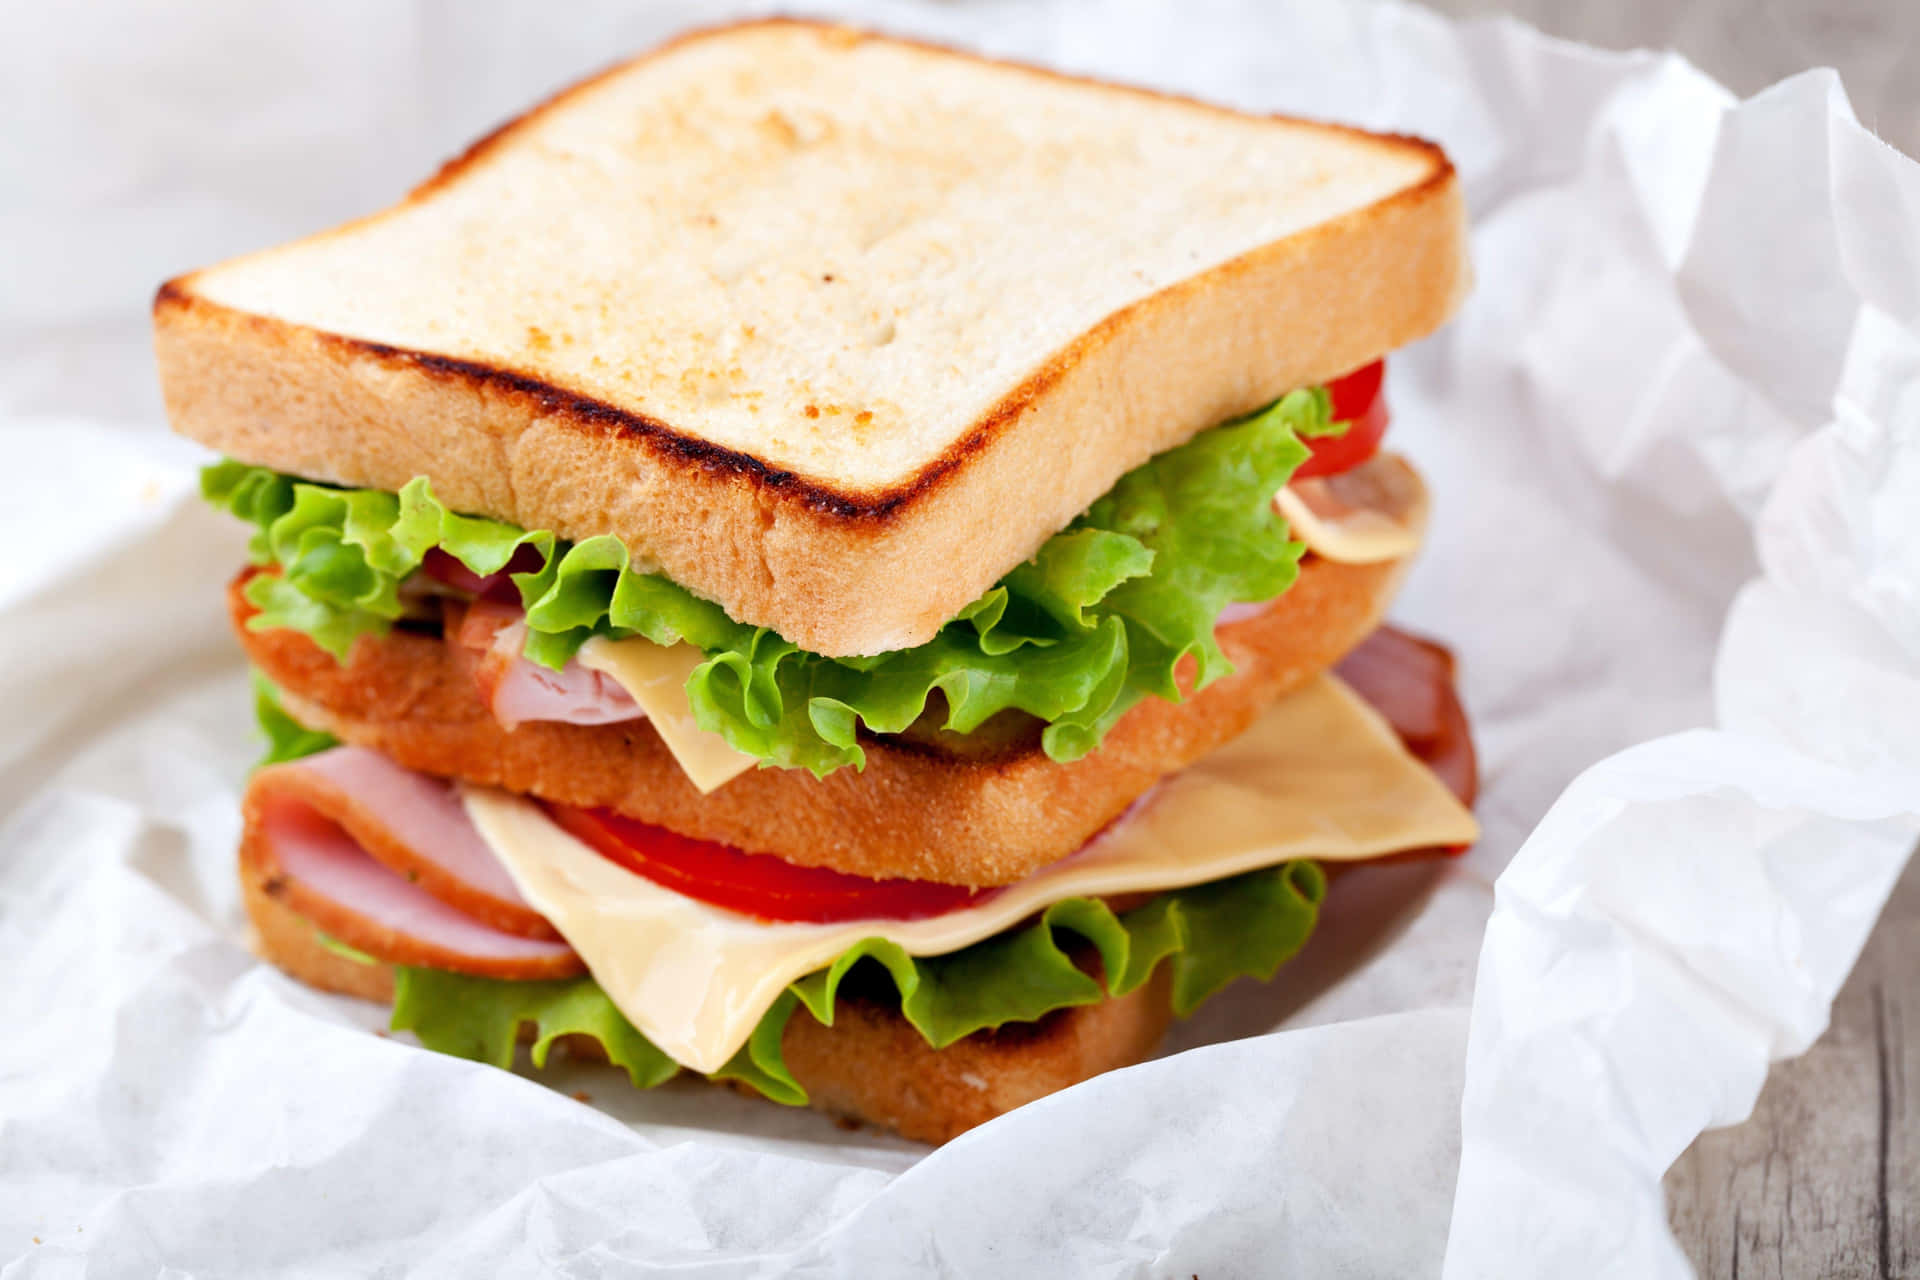 Enjoy a tasty sandwich that can satisfy your hunger